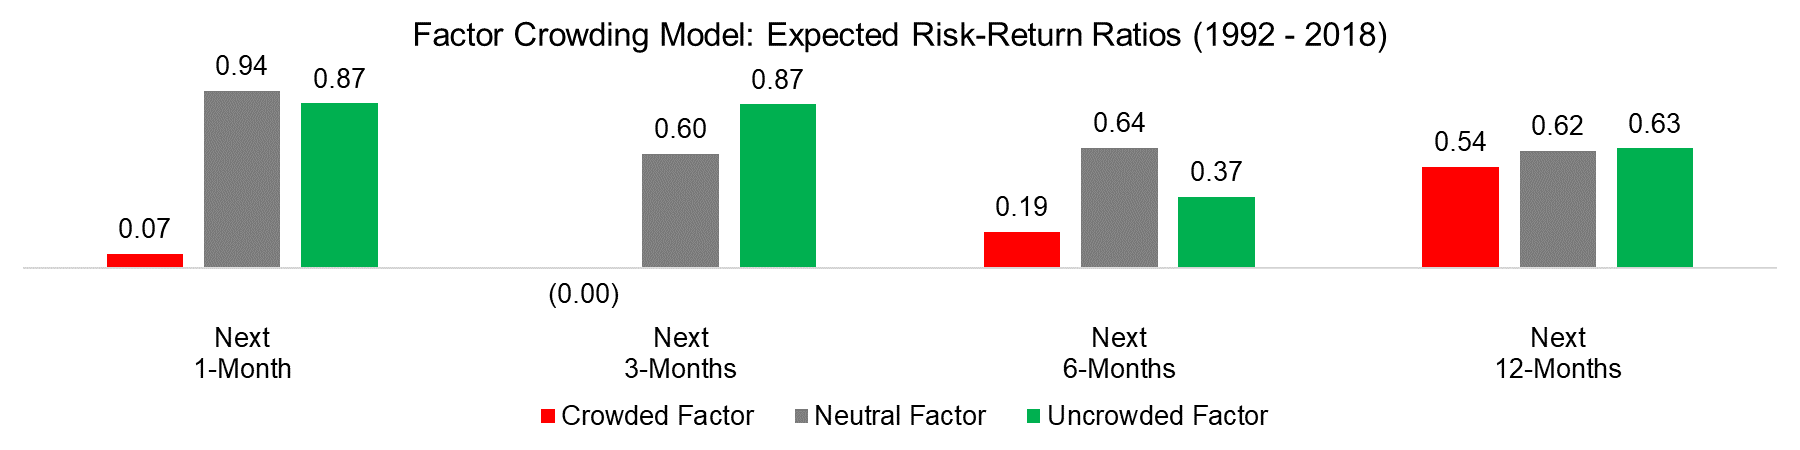 Factor Crowding Model Expected Risk-Return Ratios (1992 - 2018)